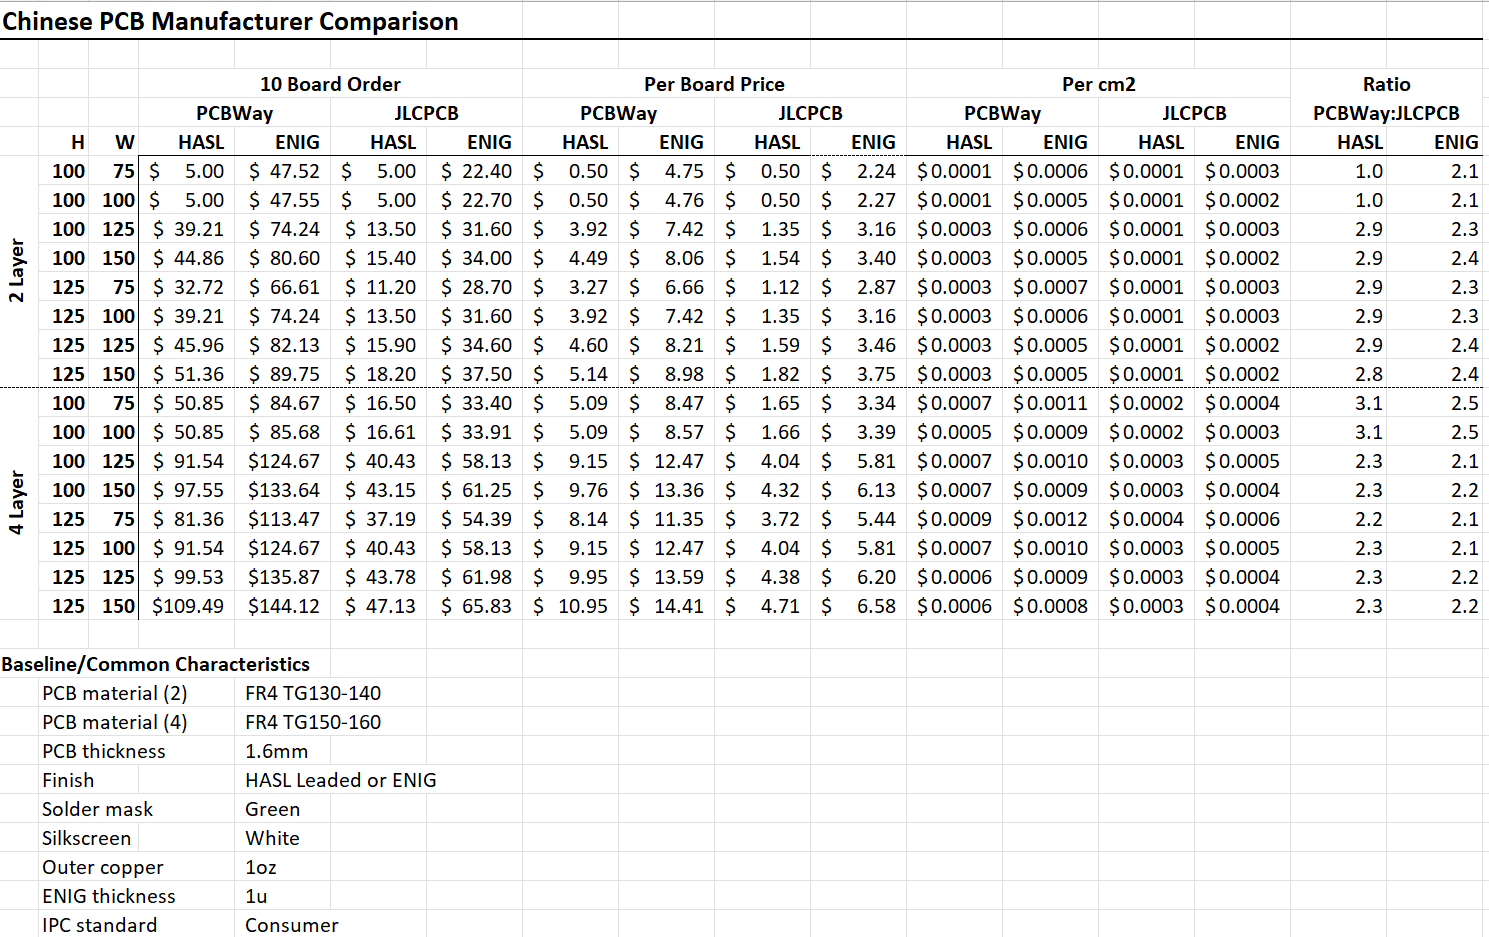 Spreadsheet comparing pricing for PCBWay and
JLCPCB